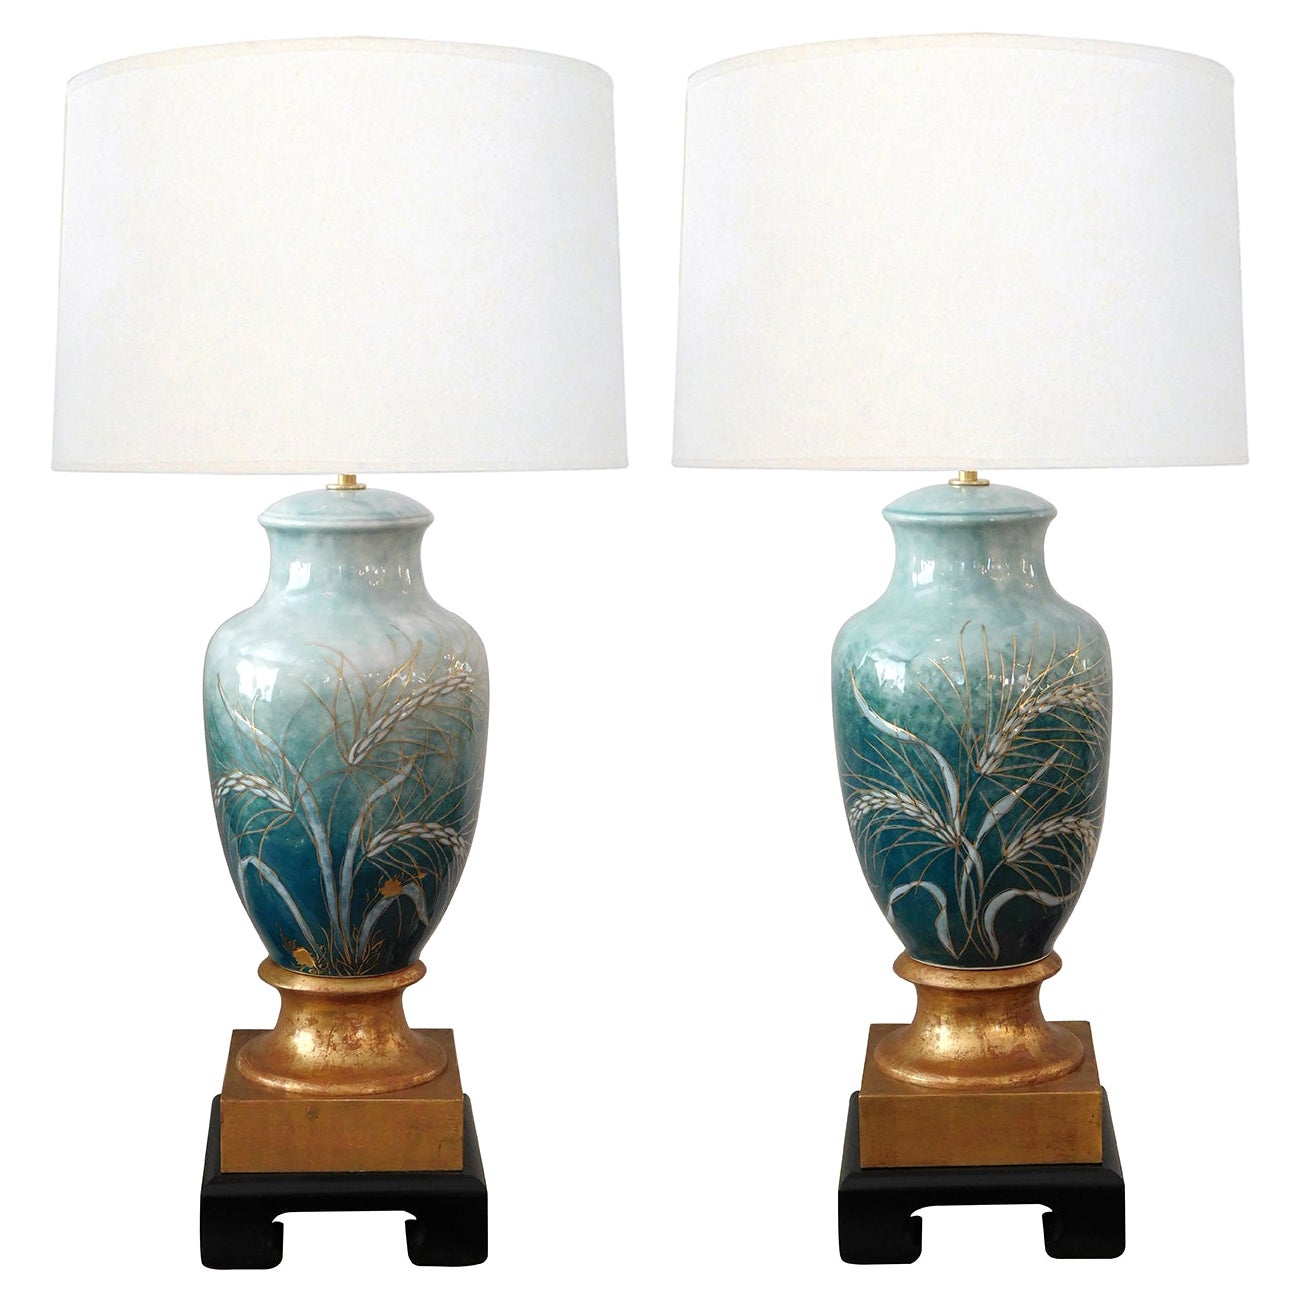 Pair Signed Camille Tharaud '1878-1956' Enameled Porcelain Lamps, Limoges